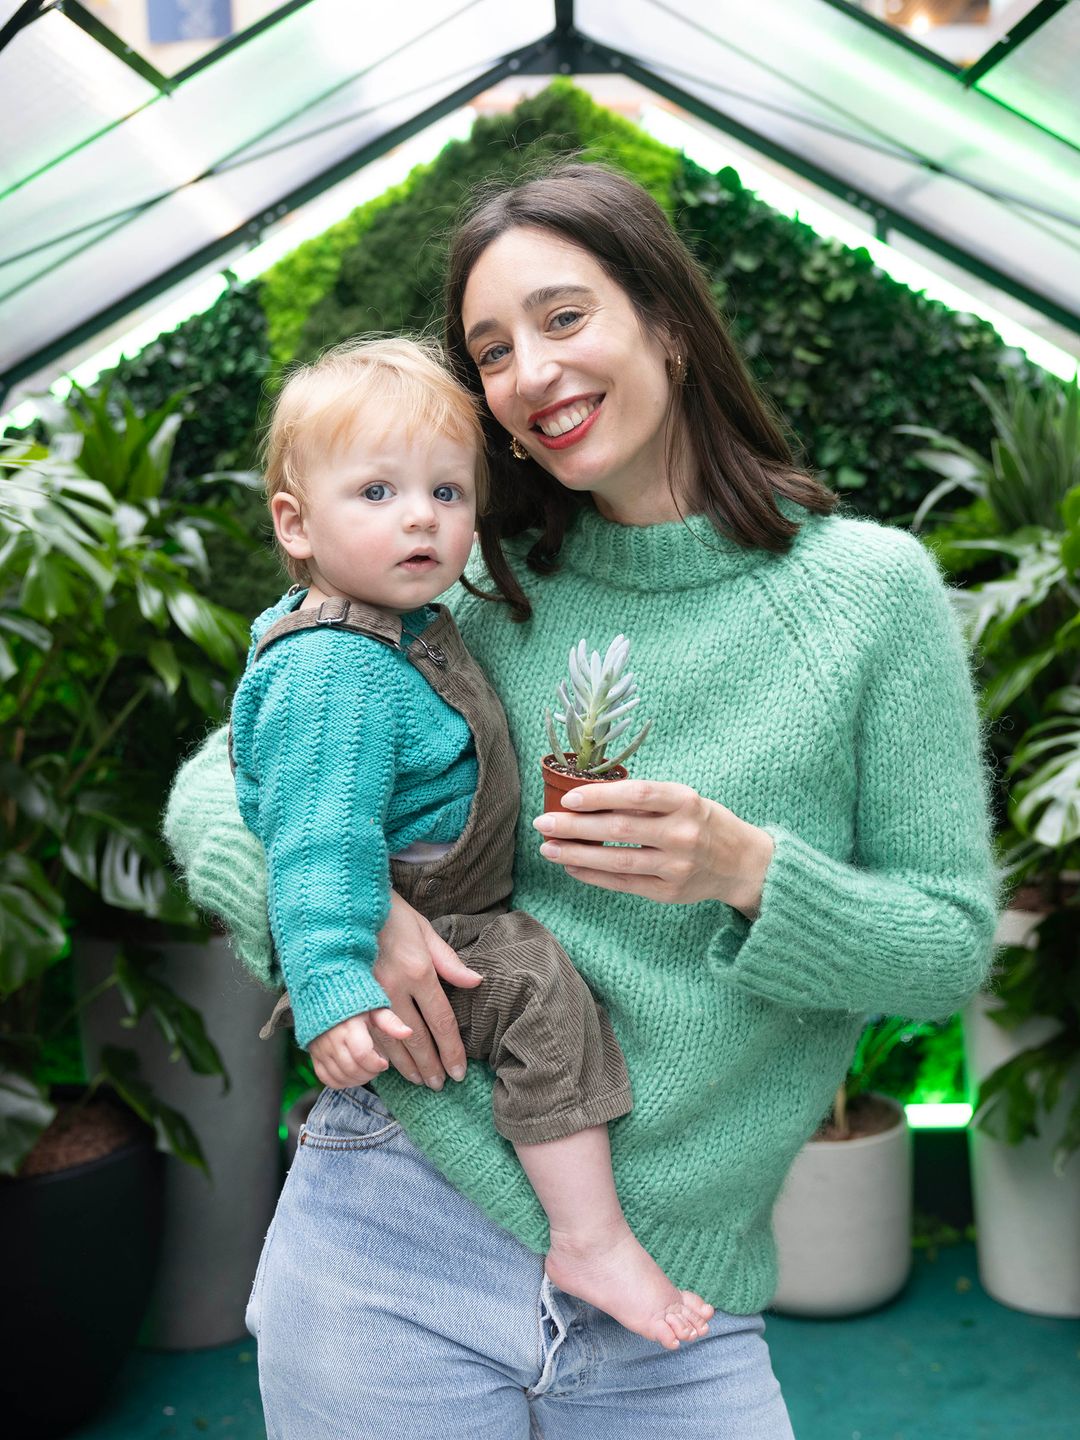 Television presenter Laura Jackson with her son Nico aged 1 as she donates her used childrenâs clothes and books at the launch of Westfieldâs Good Festival